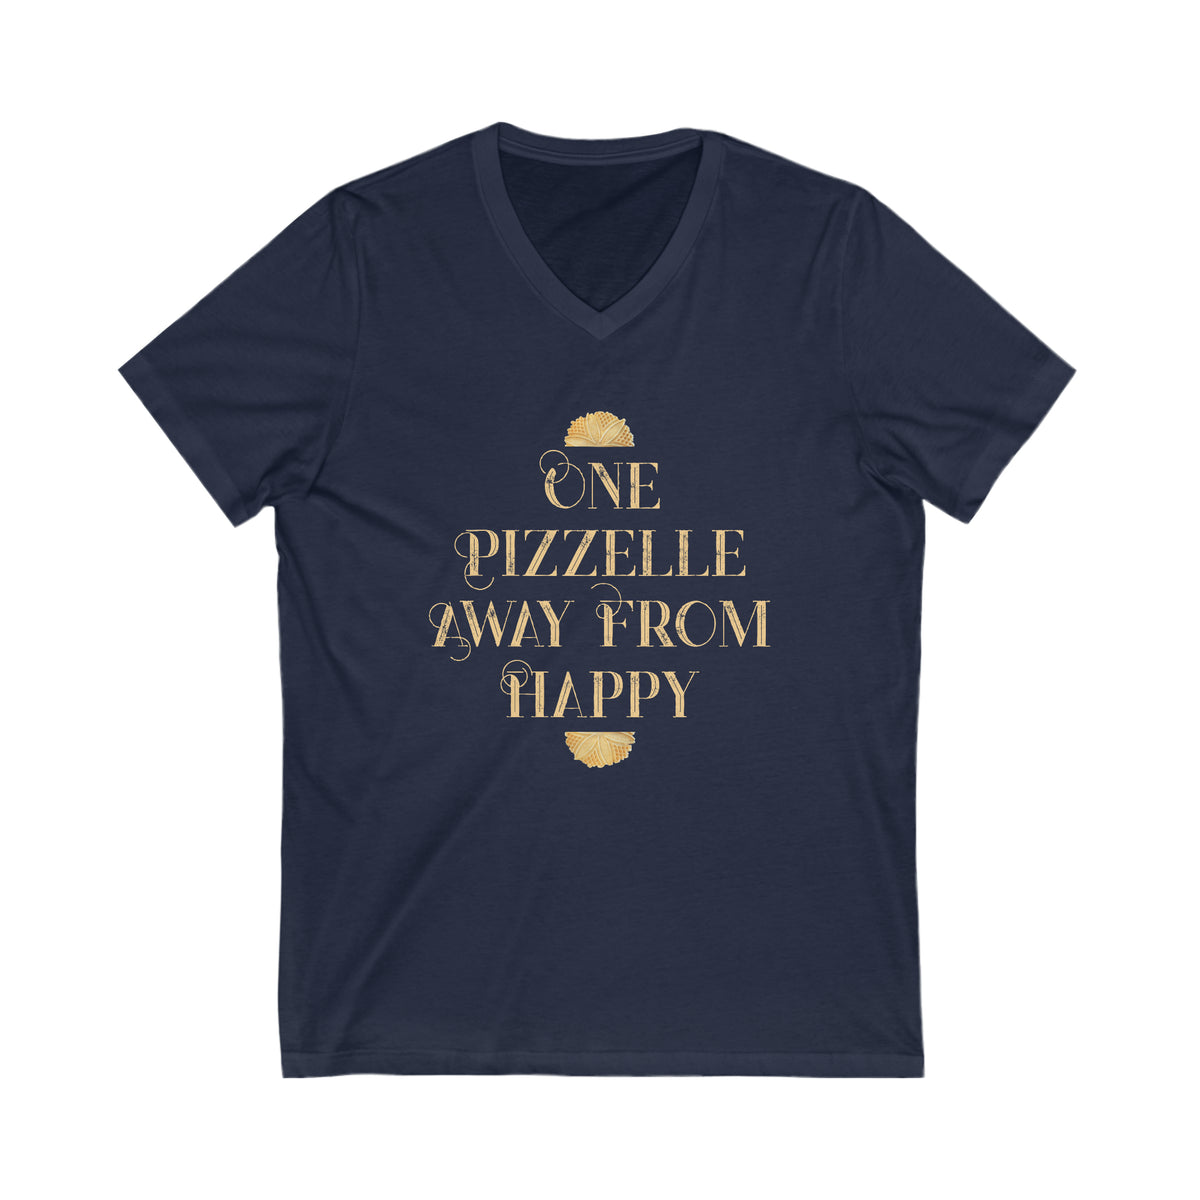 Italian Pizzelle Holiday Cookies Shirt | Foodie Baking Gift | Unisex V-neck T-shirt